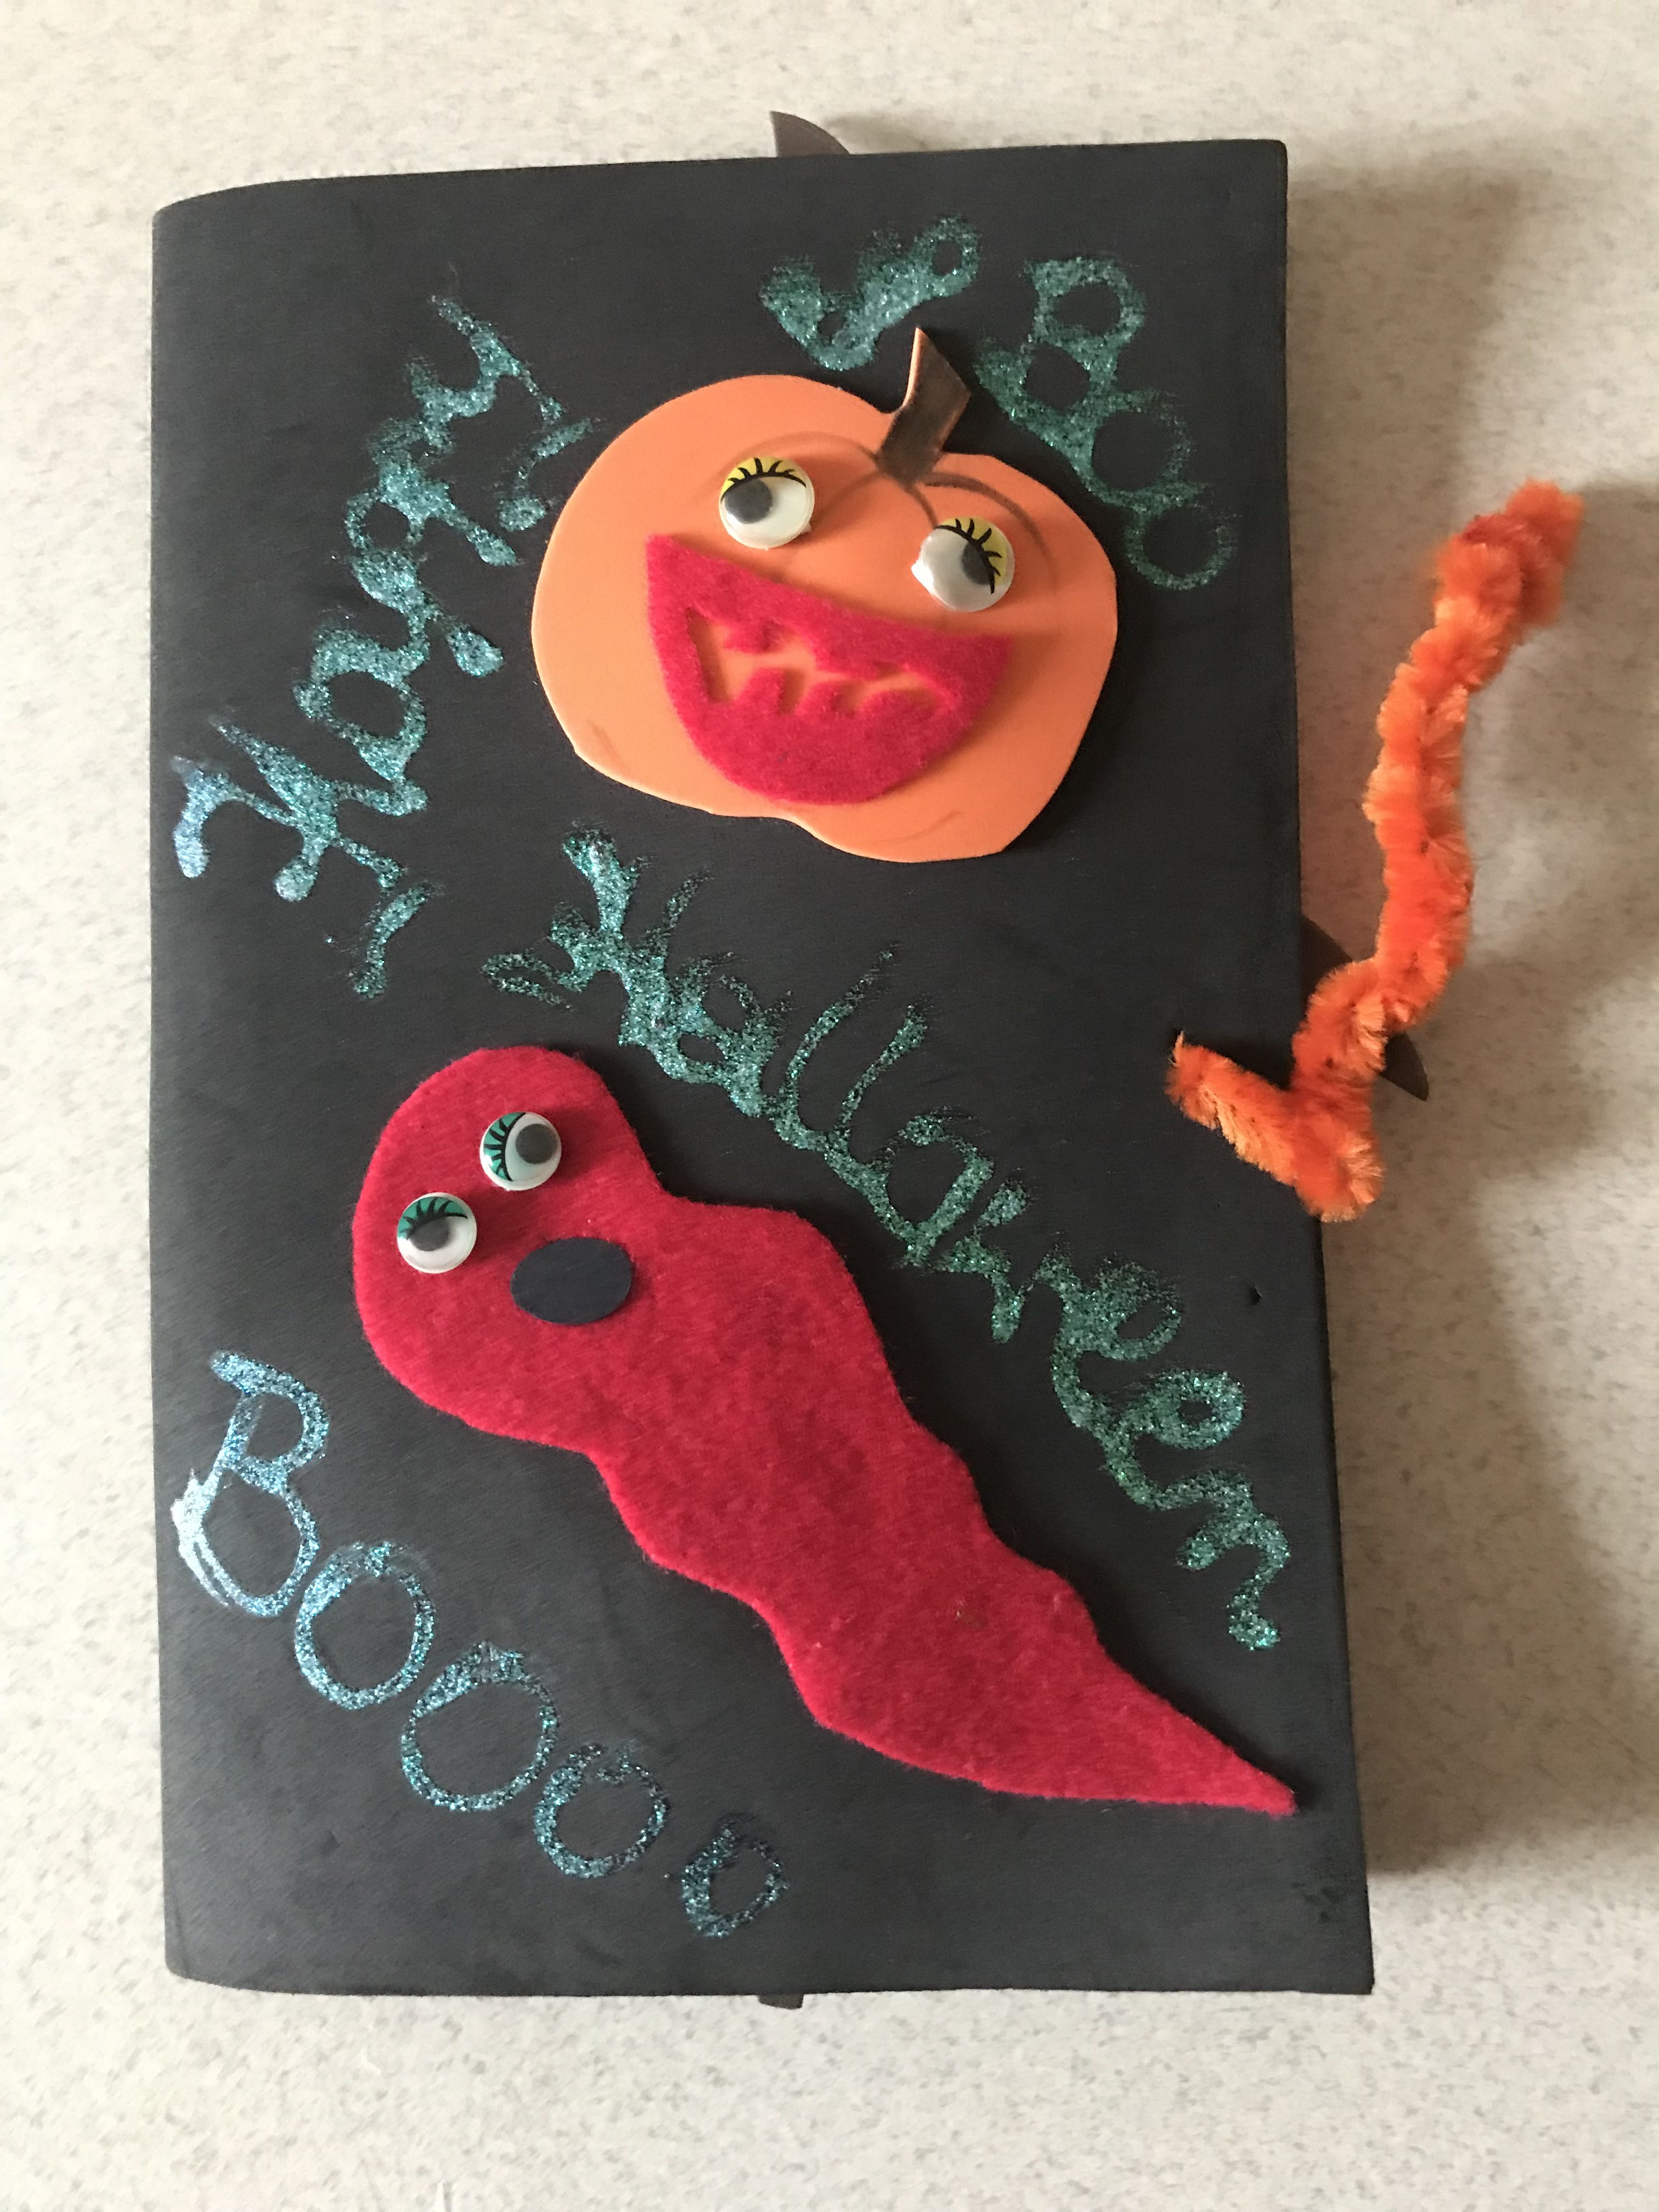 Halloween gift from Martha to her friend's daughter